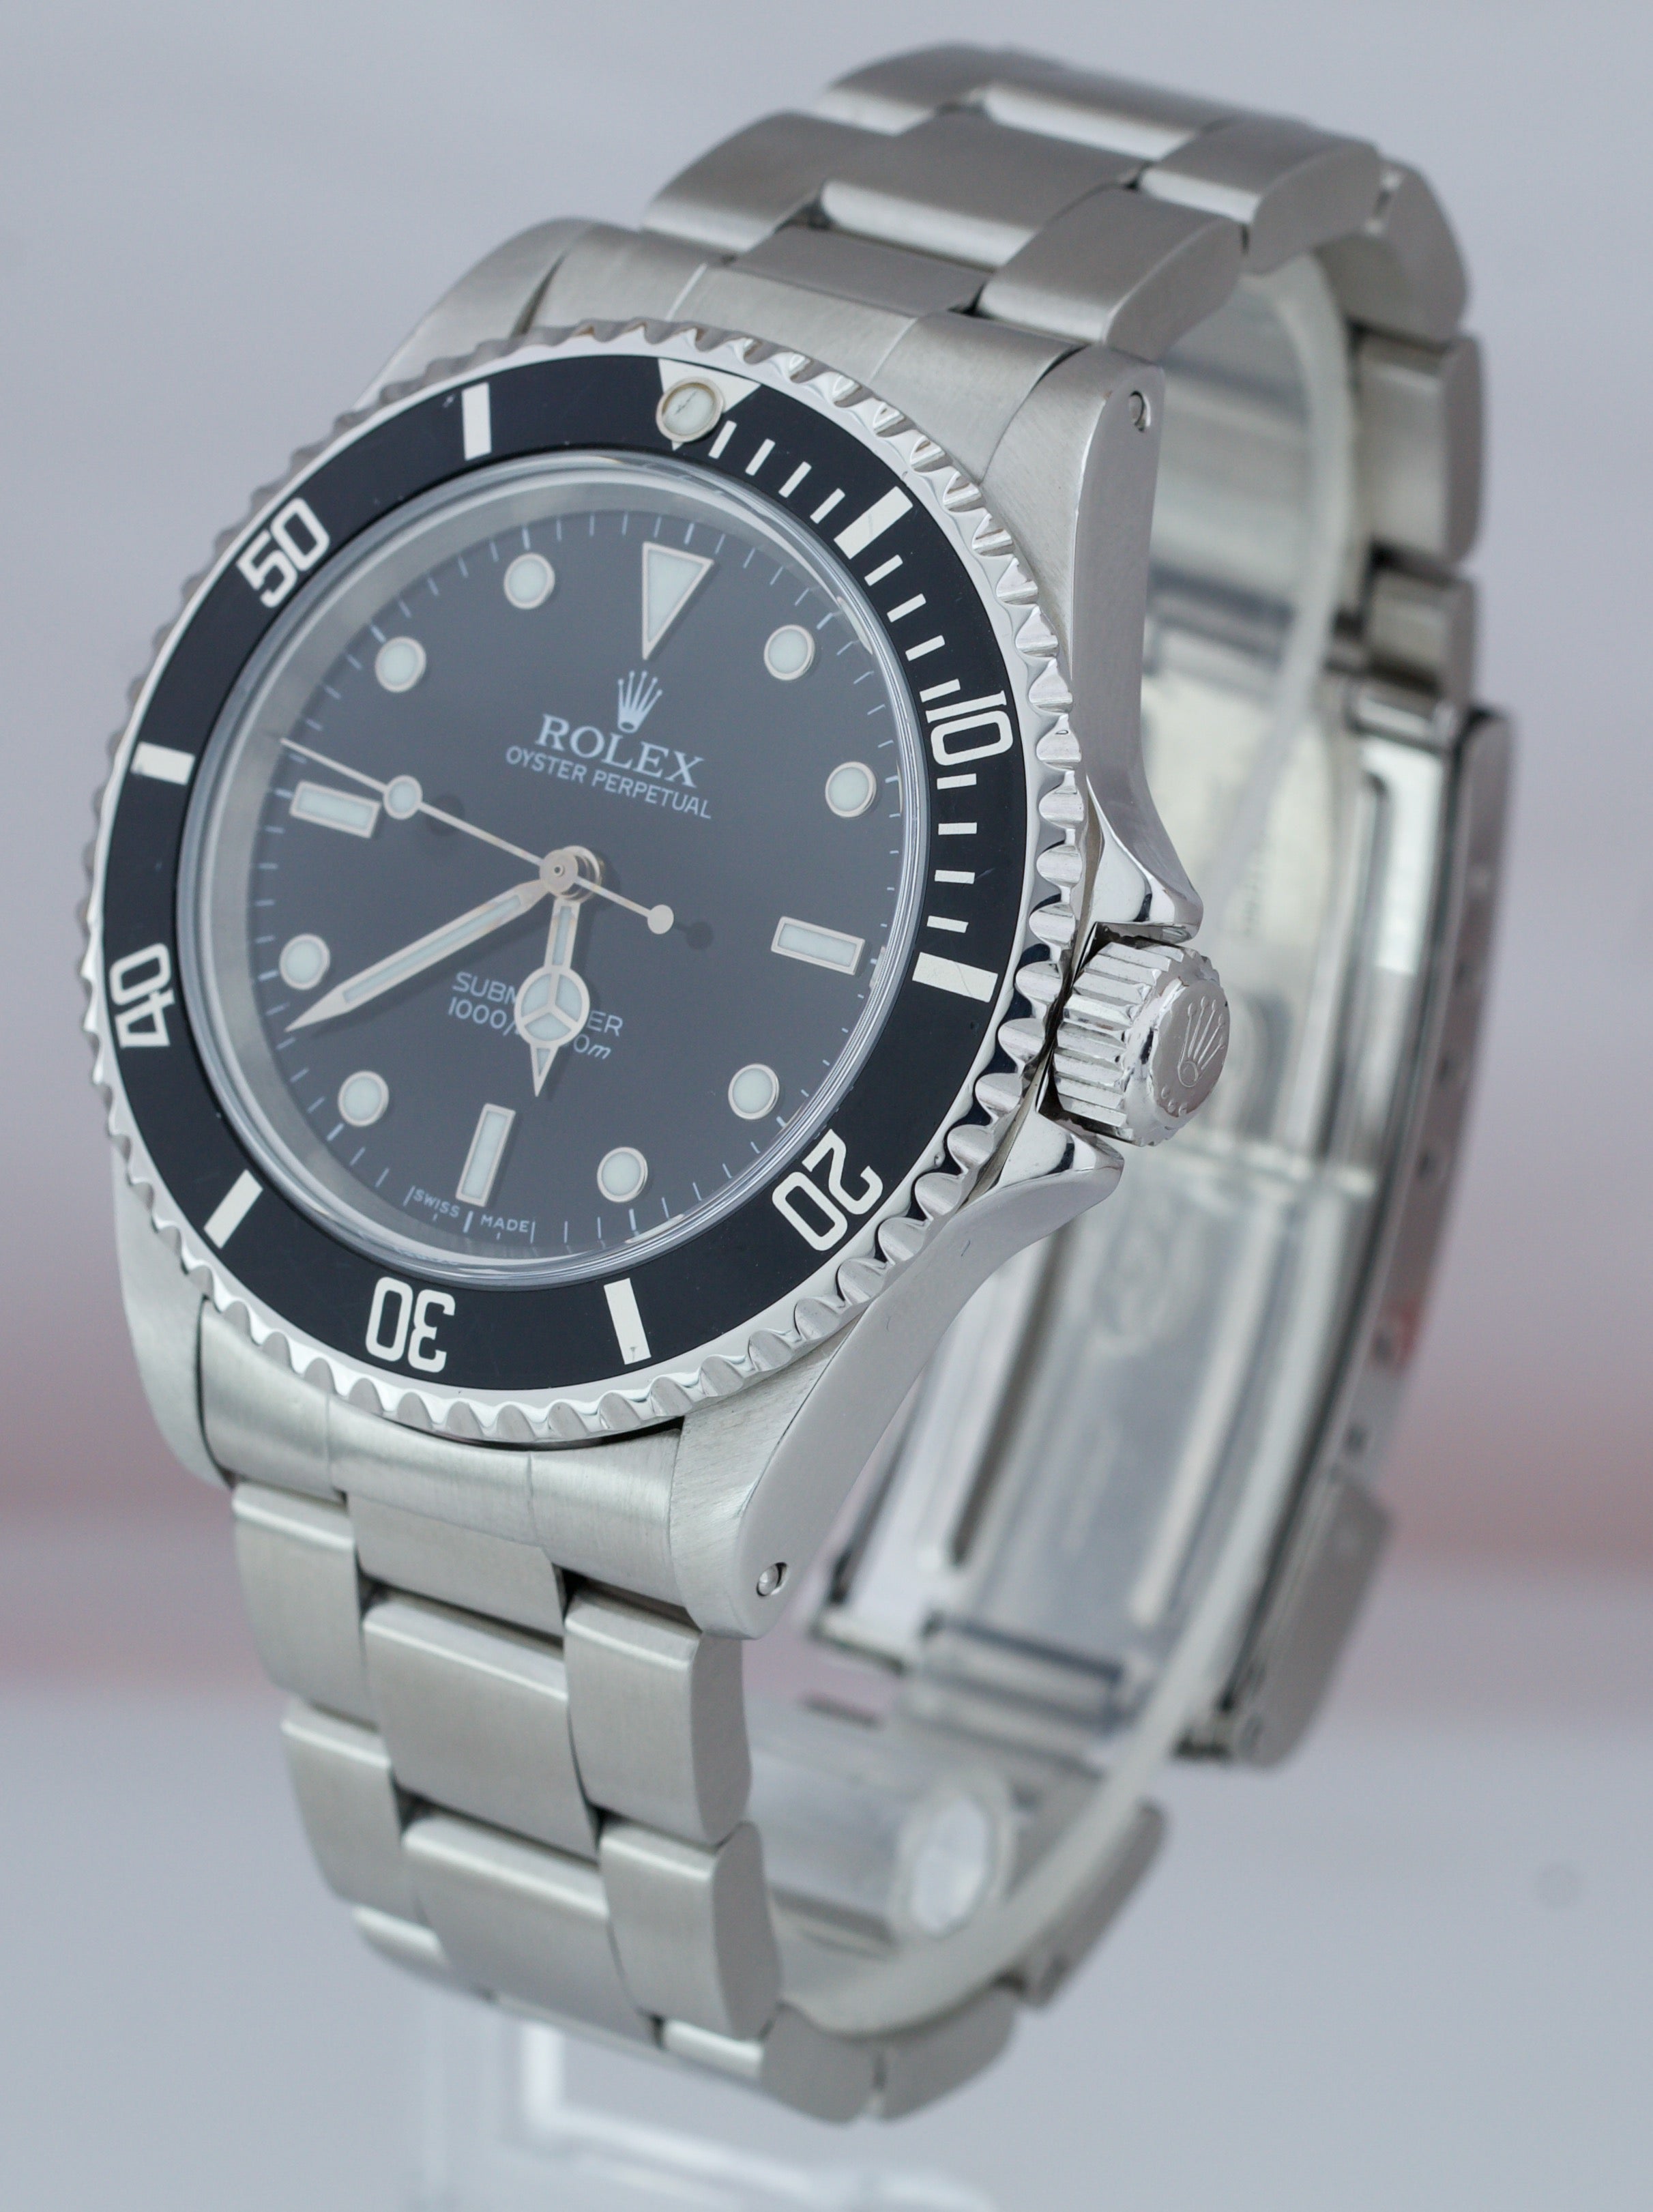 2002 MINT Rolex Submariner No-Date 14060M Stainless F Black Dive 40mm Watch